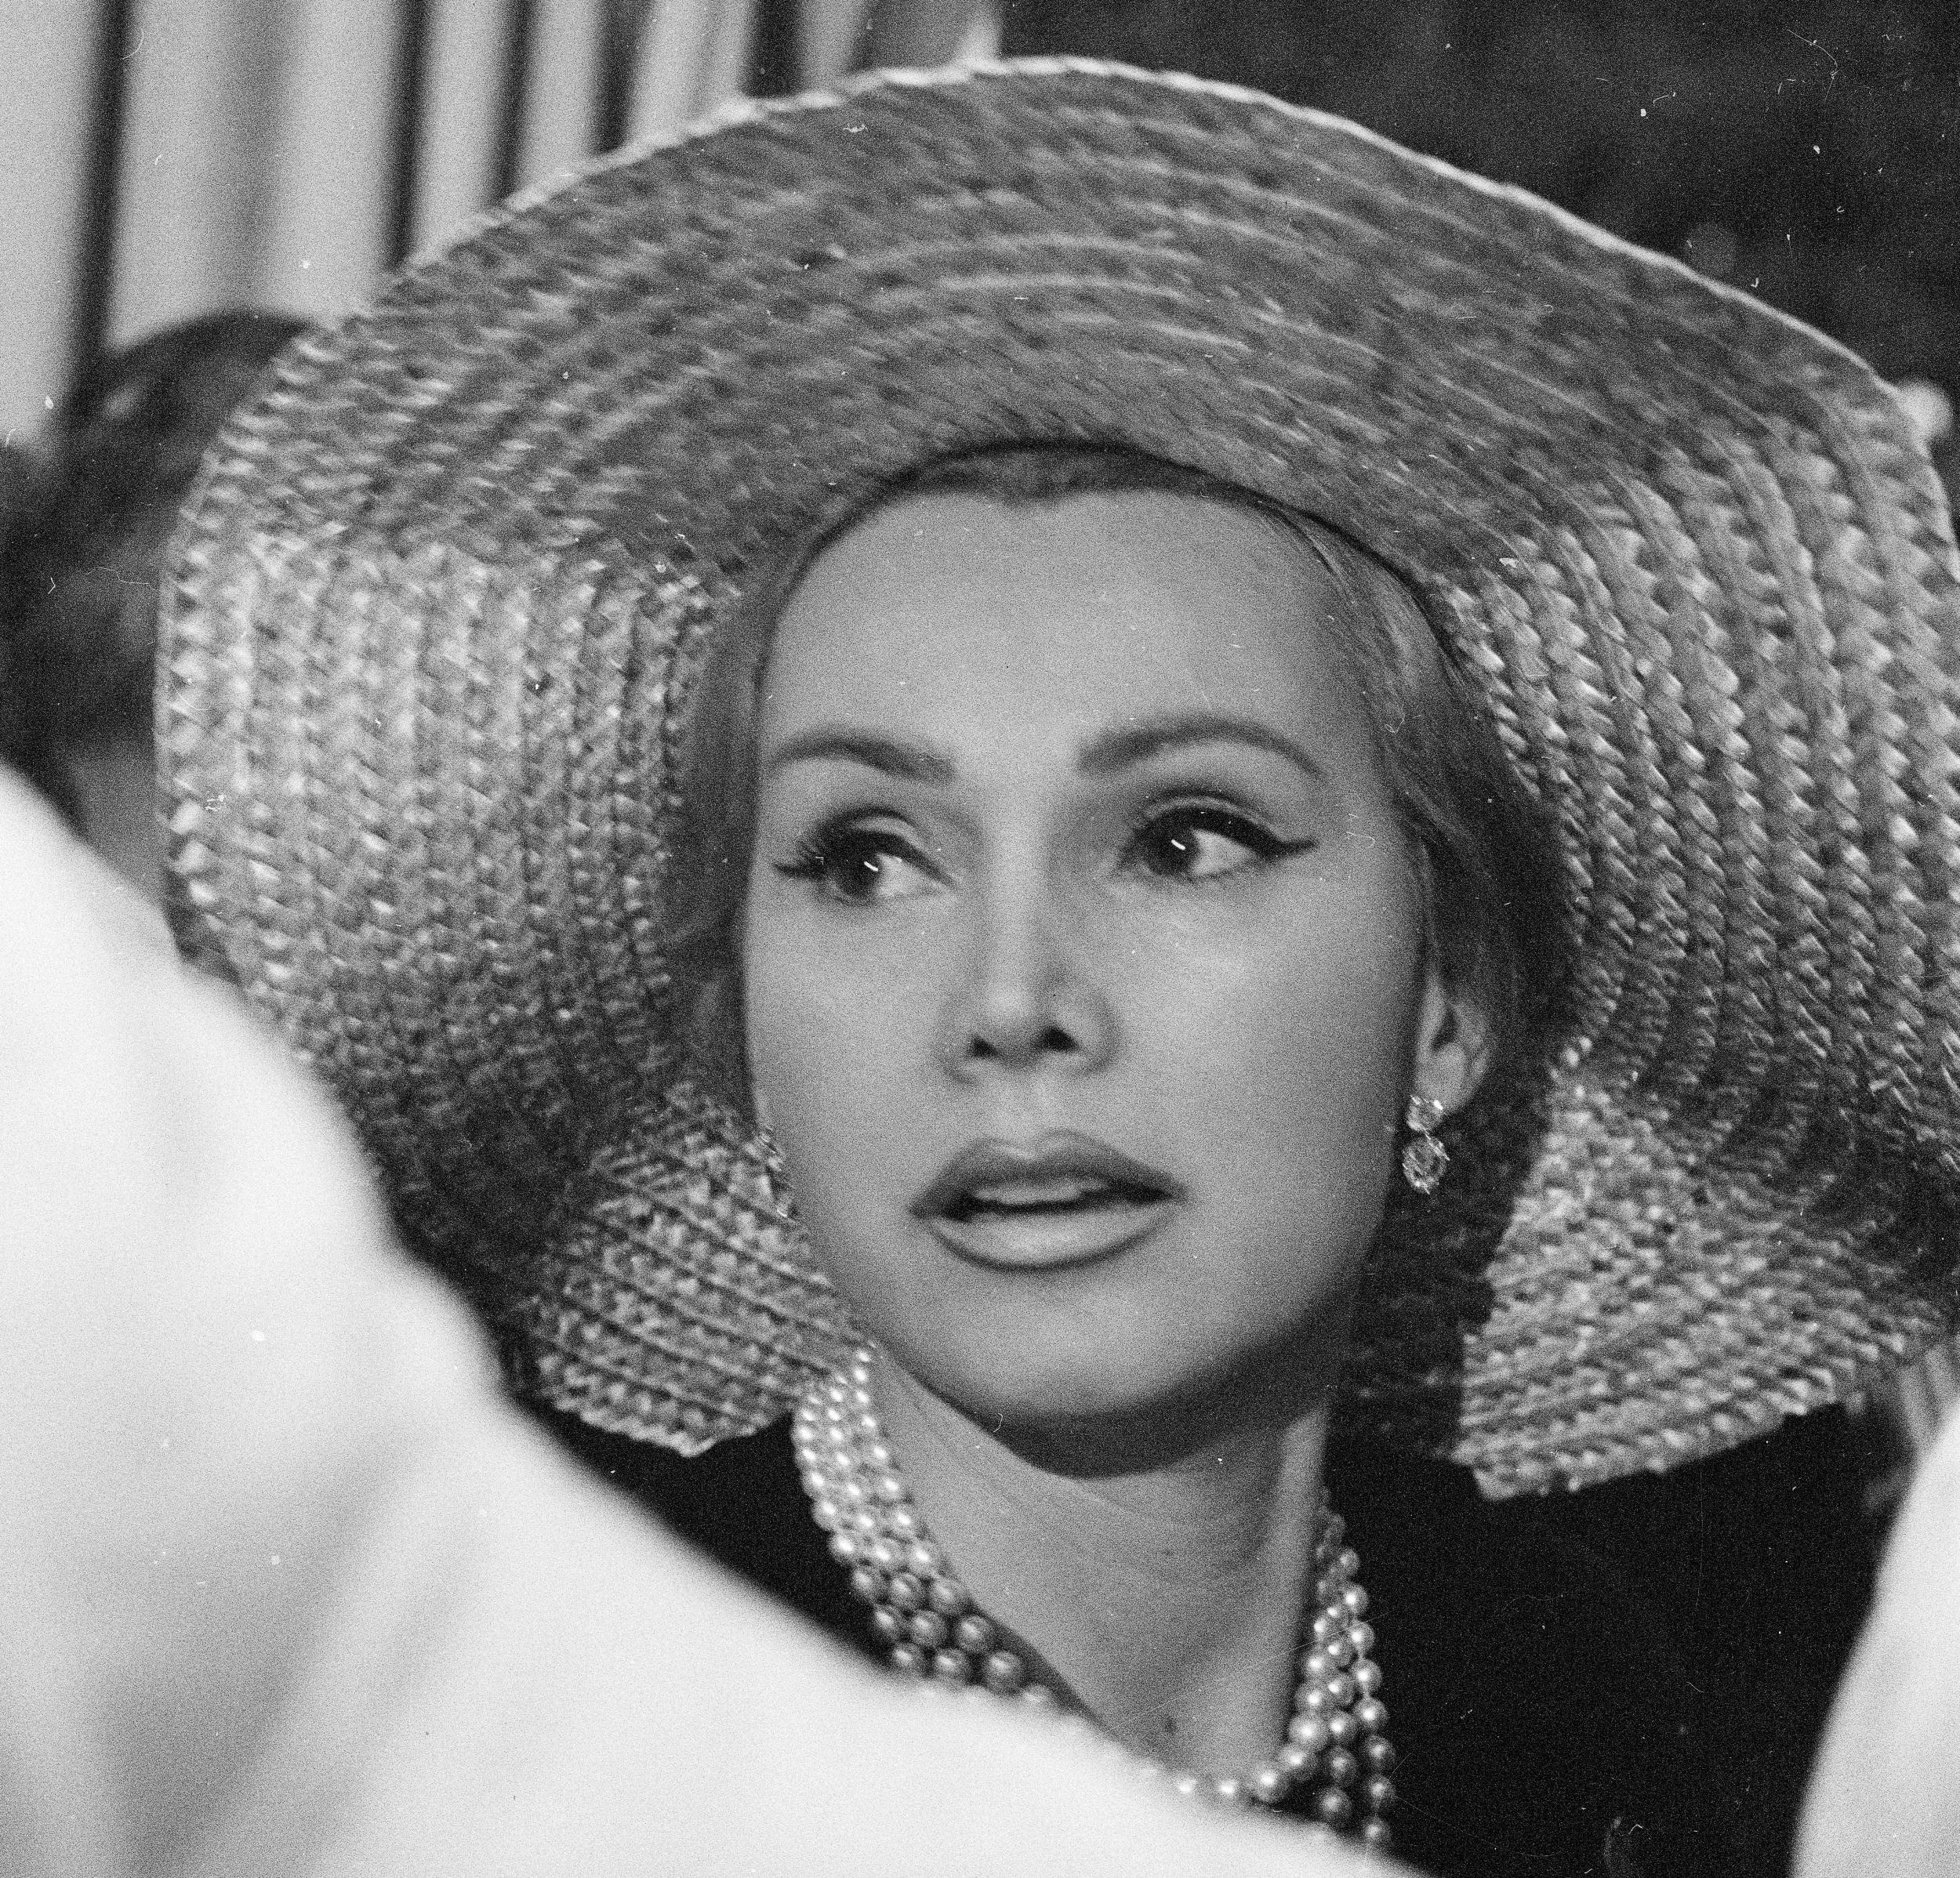 Zsa Zsa Gabor dies aged 99 after spending over 62 years acting on both film and television